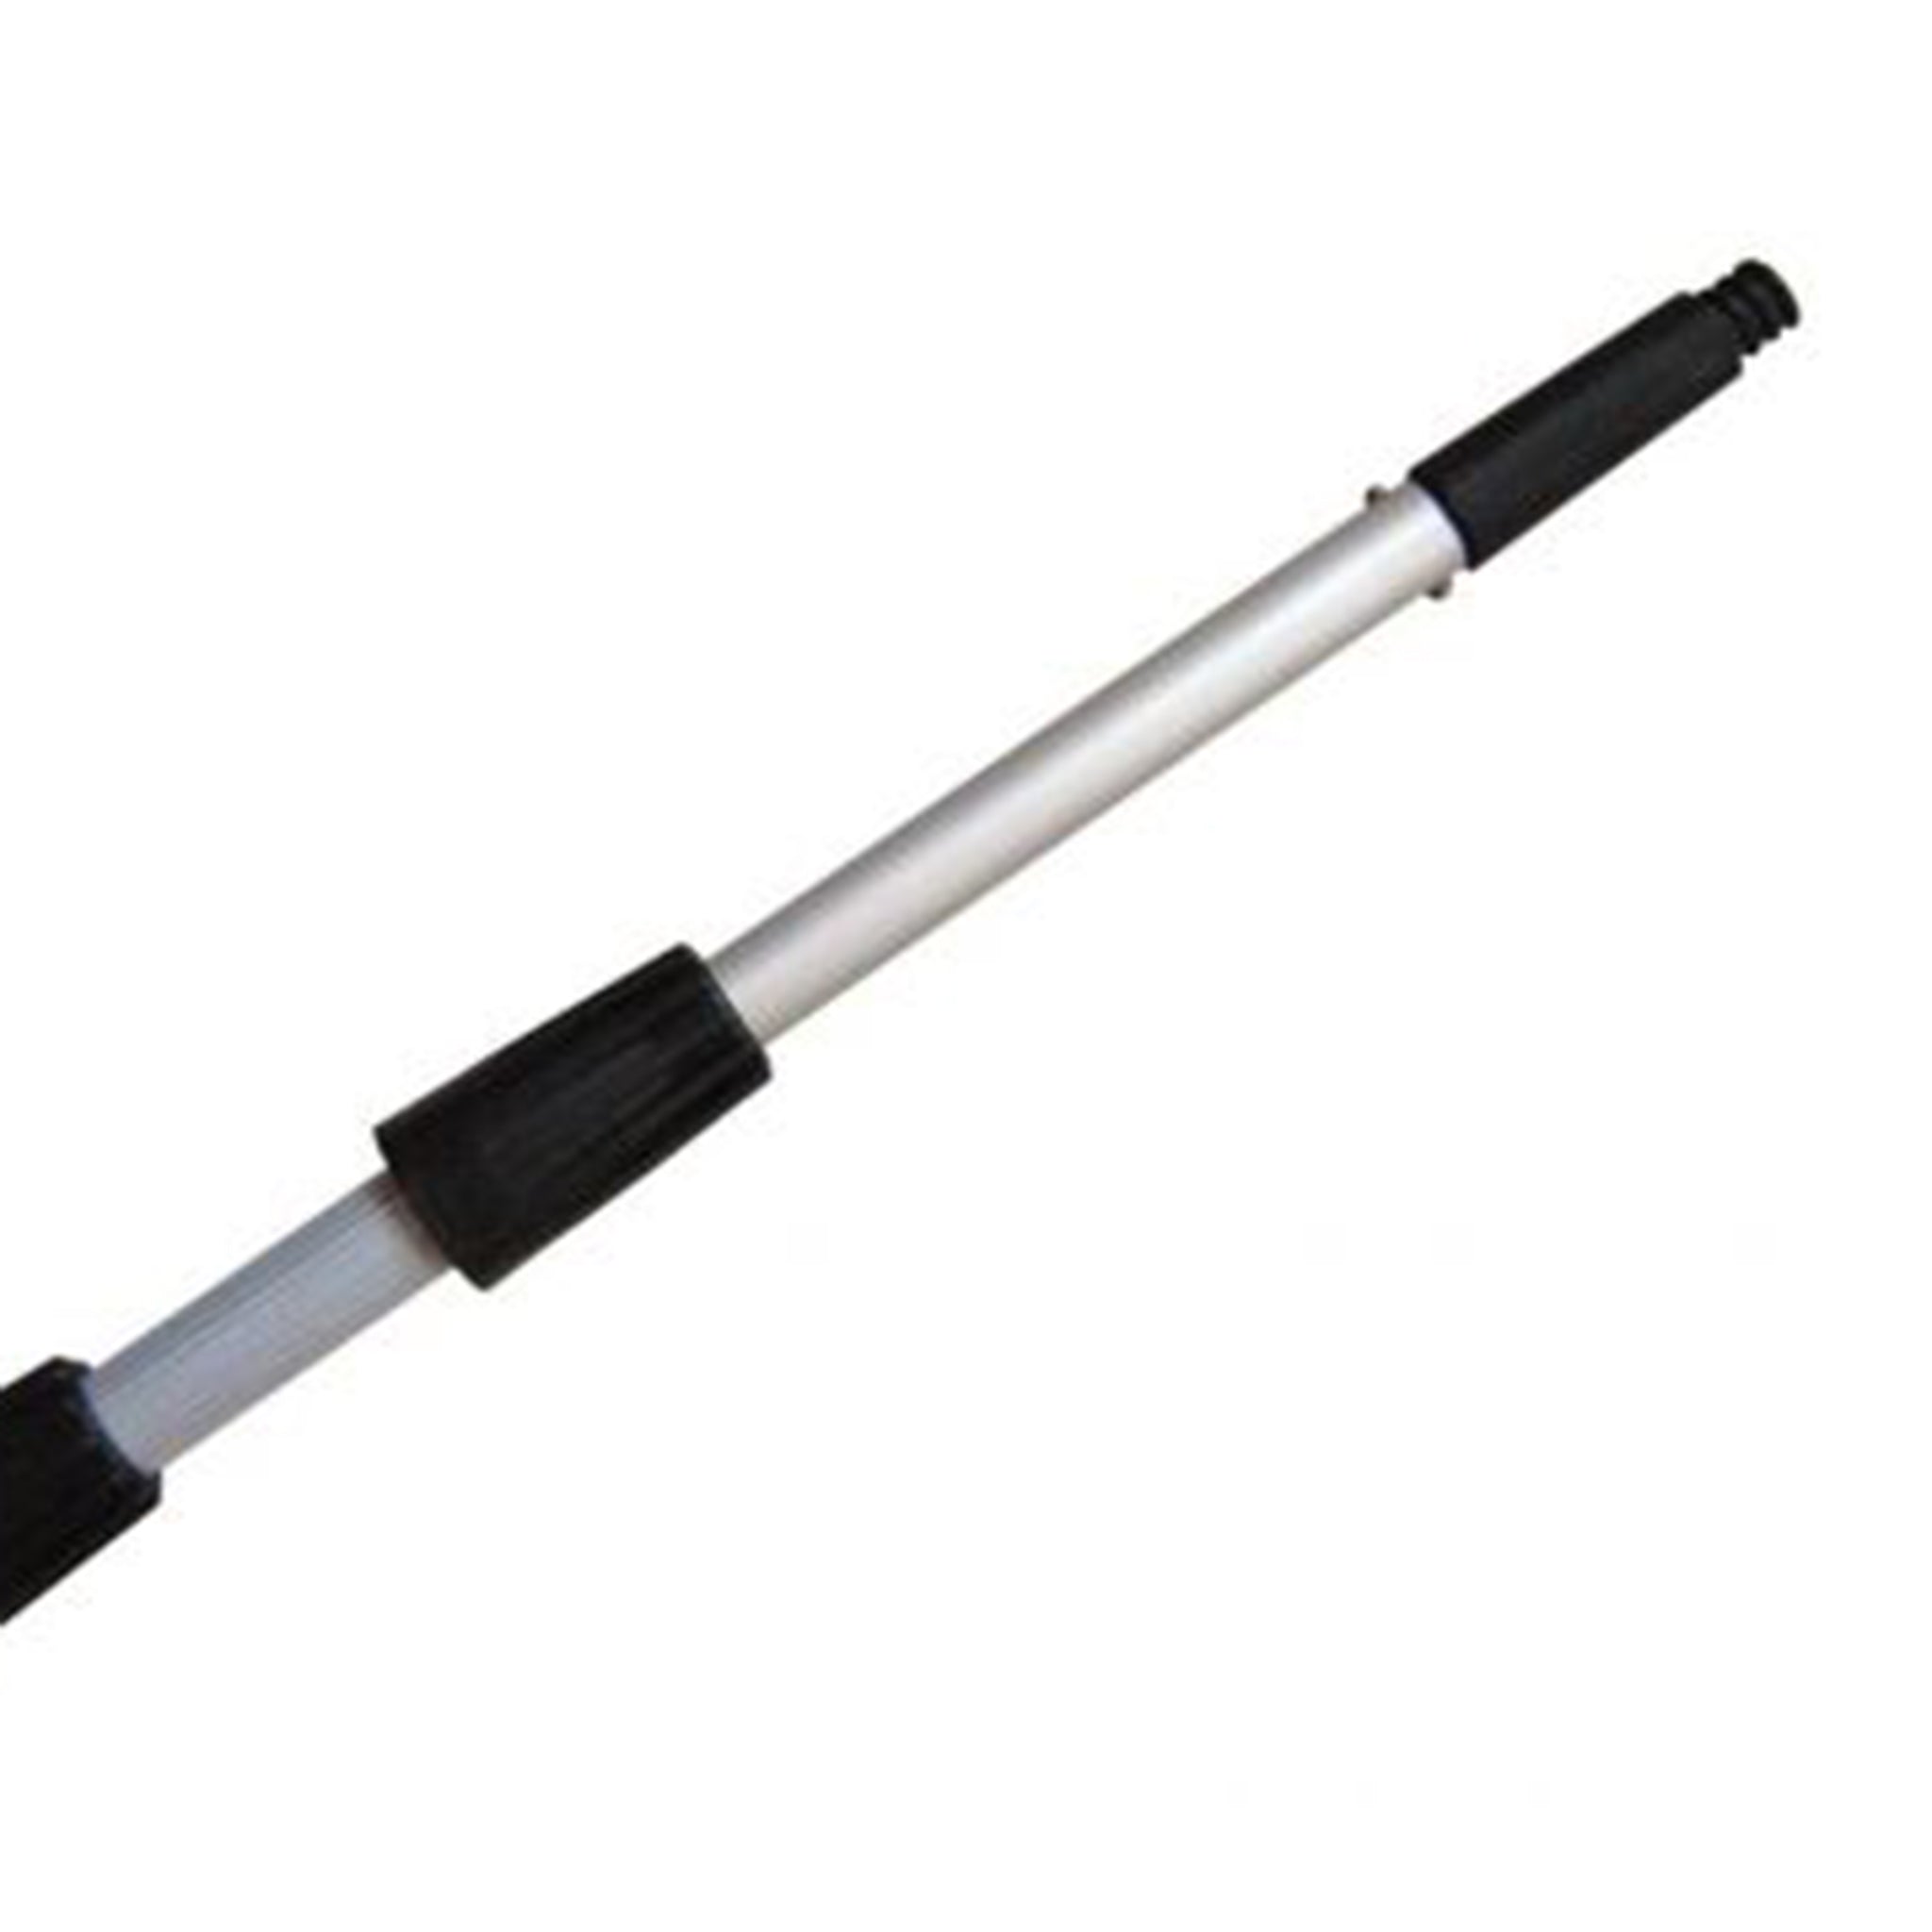 Window Telescopic Pole 29 ft with 3 extensions